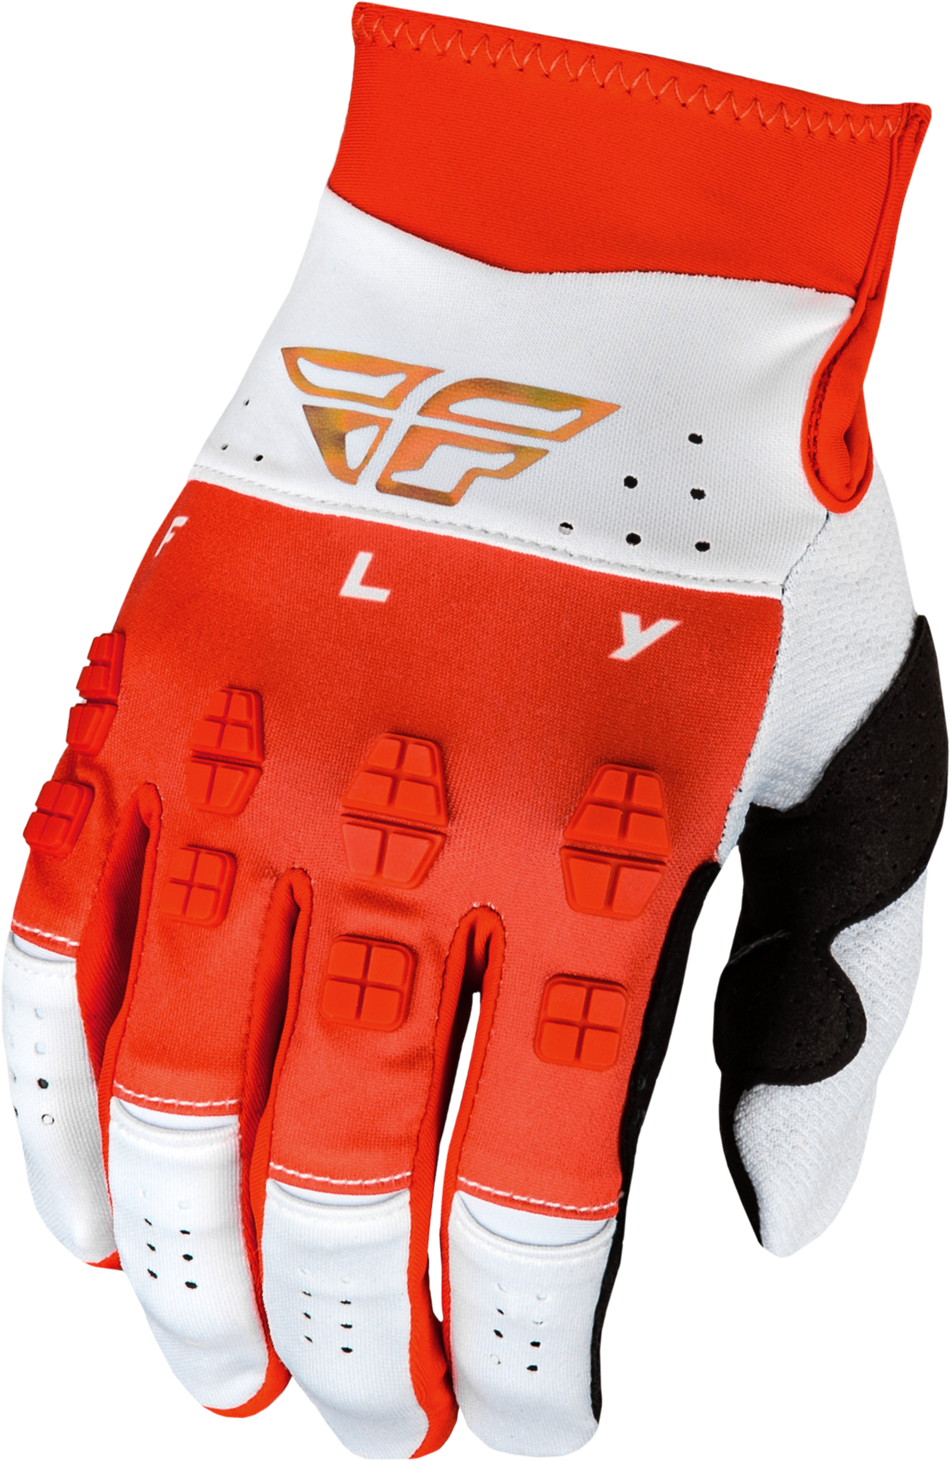 FLY RACING Evolution Dst Le Podium Gloves Red/Wht/Red Iridium Md 377-115M